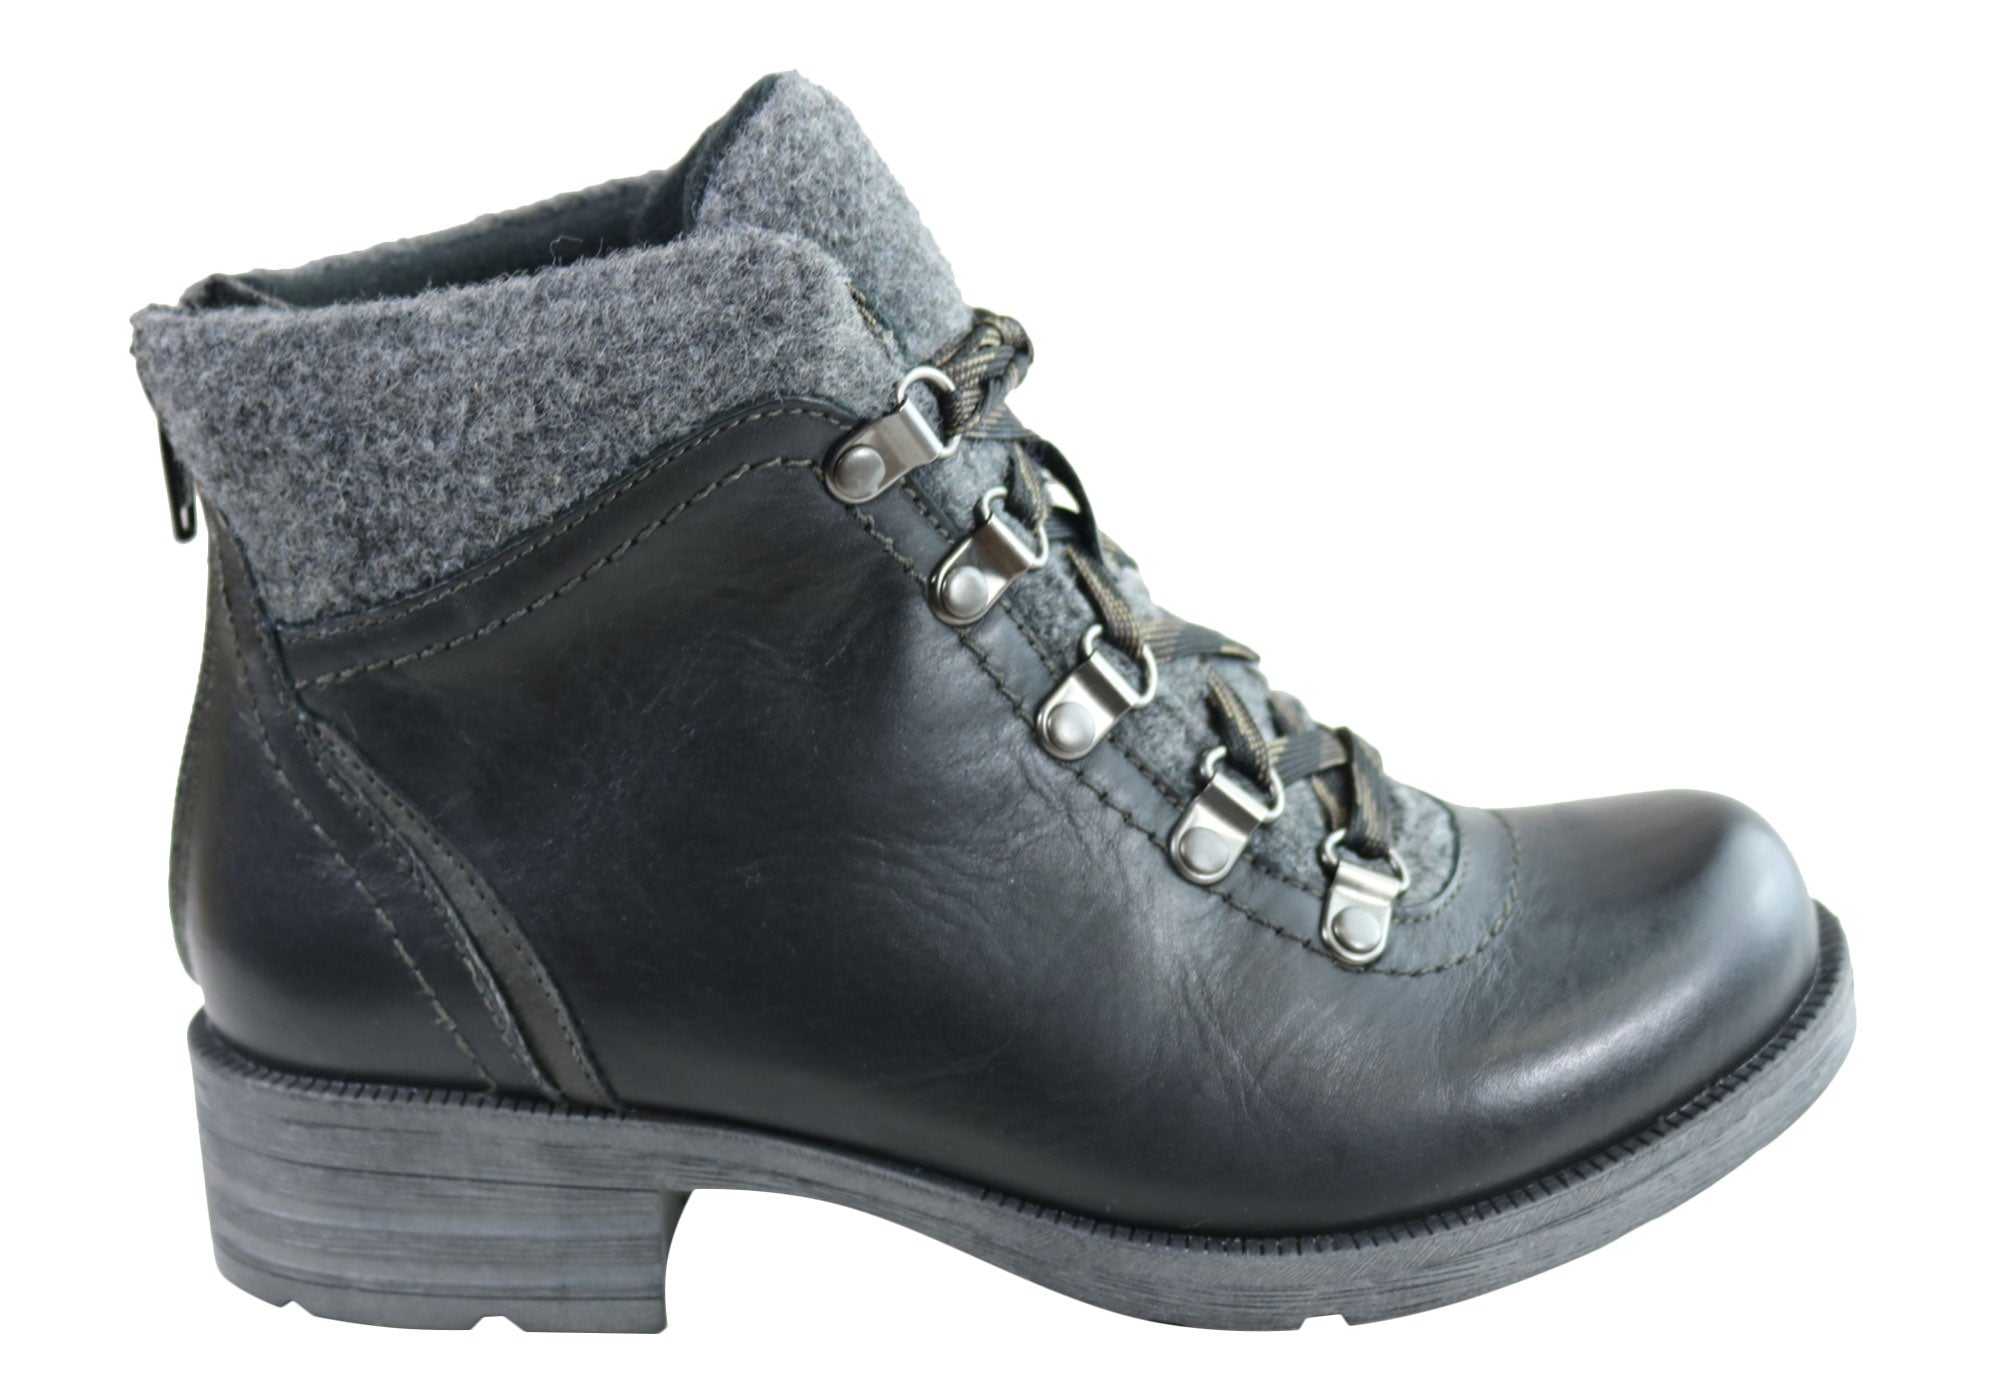 comfortable ankle boots womens